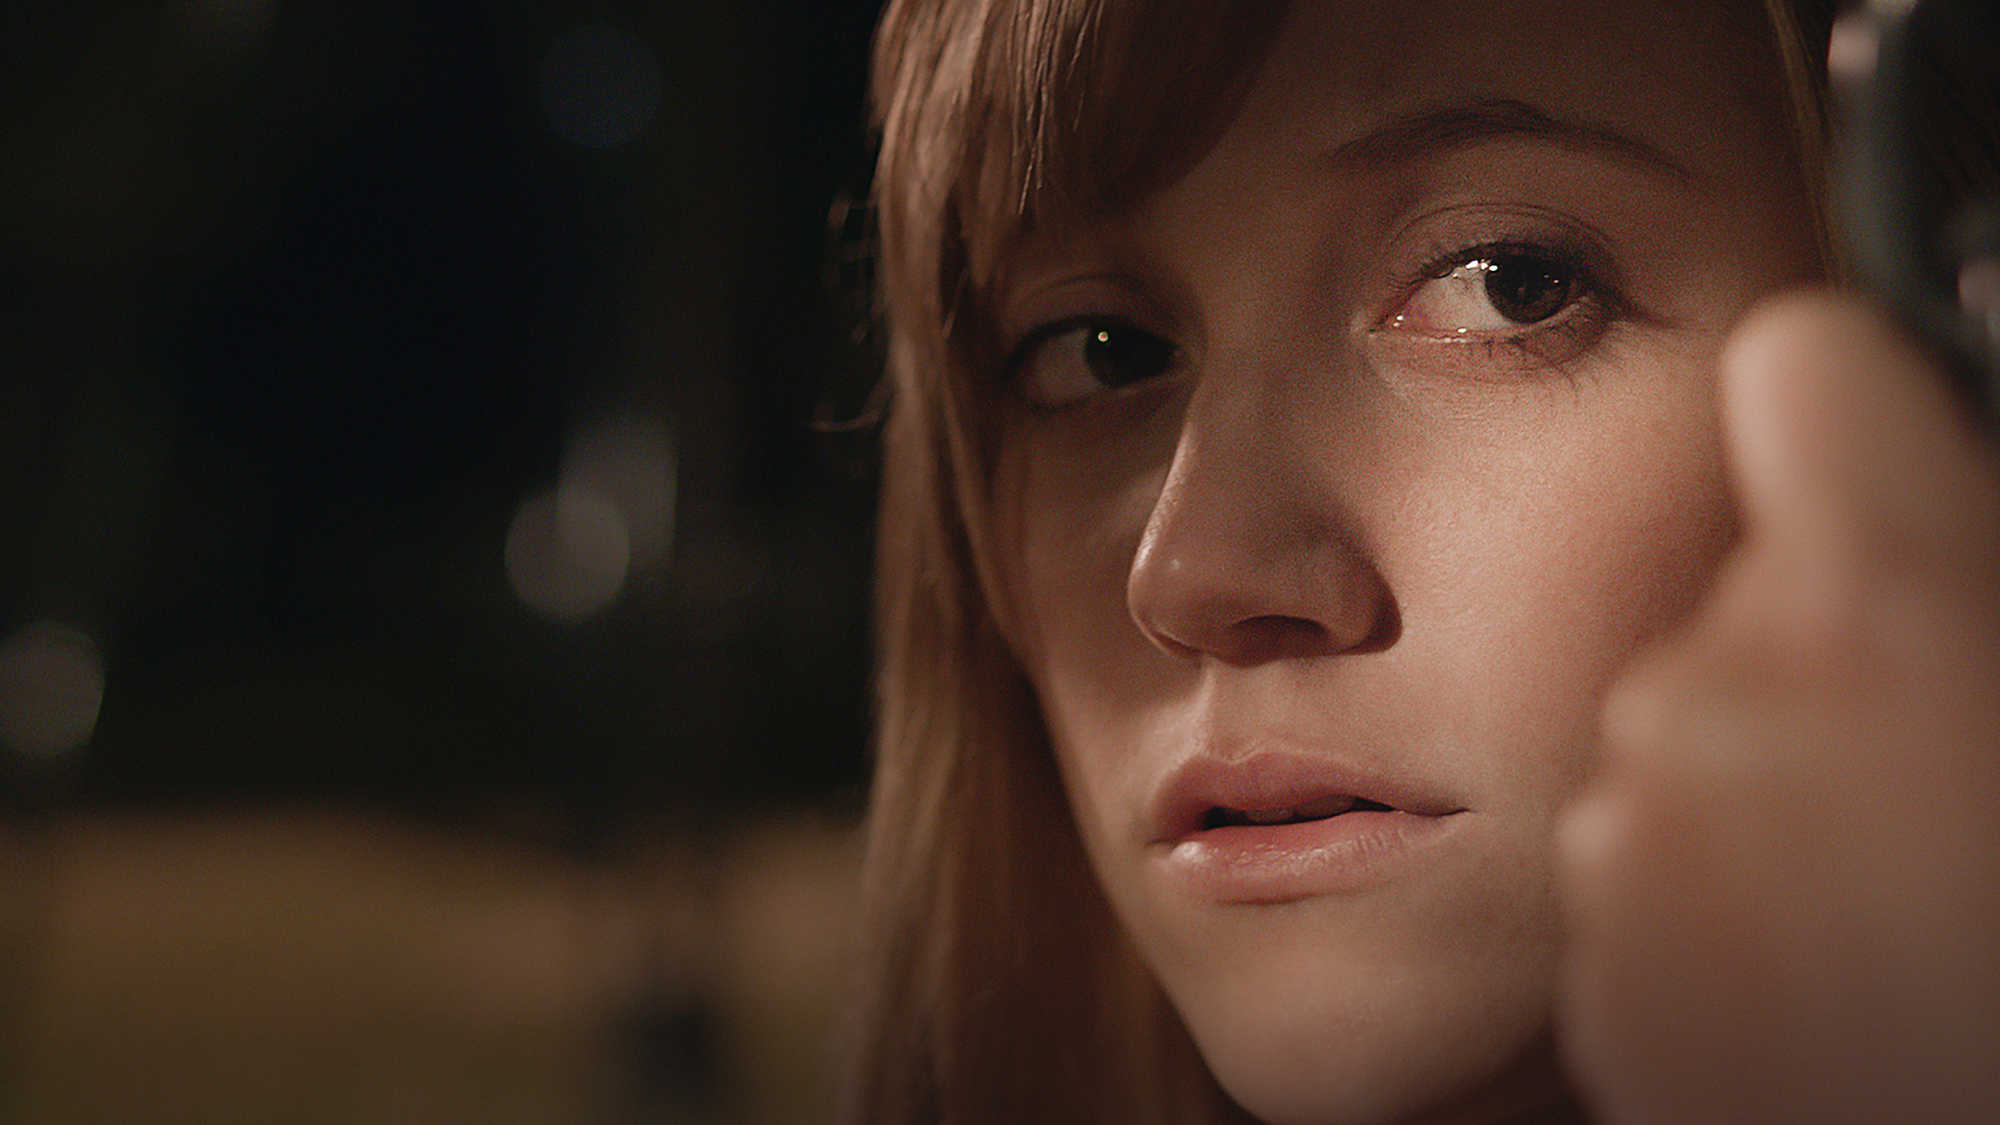 IT FOLLOWS is Complex and Unsettling